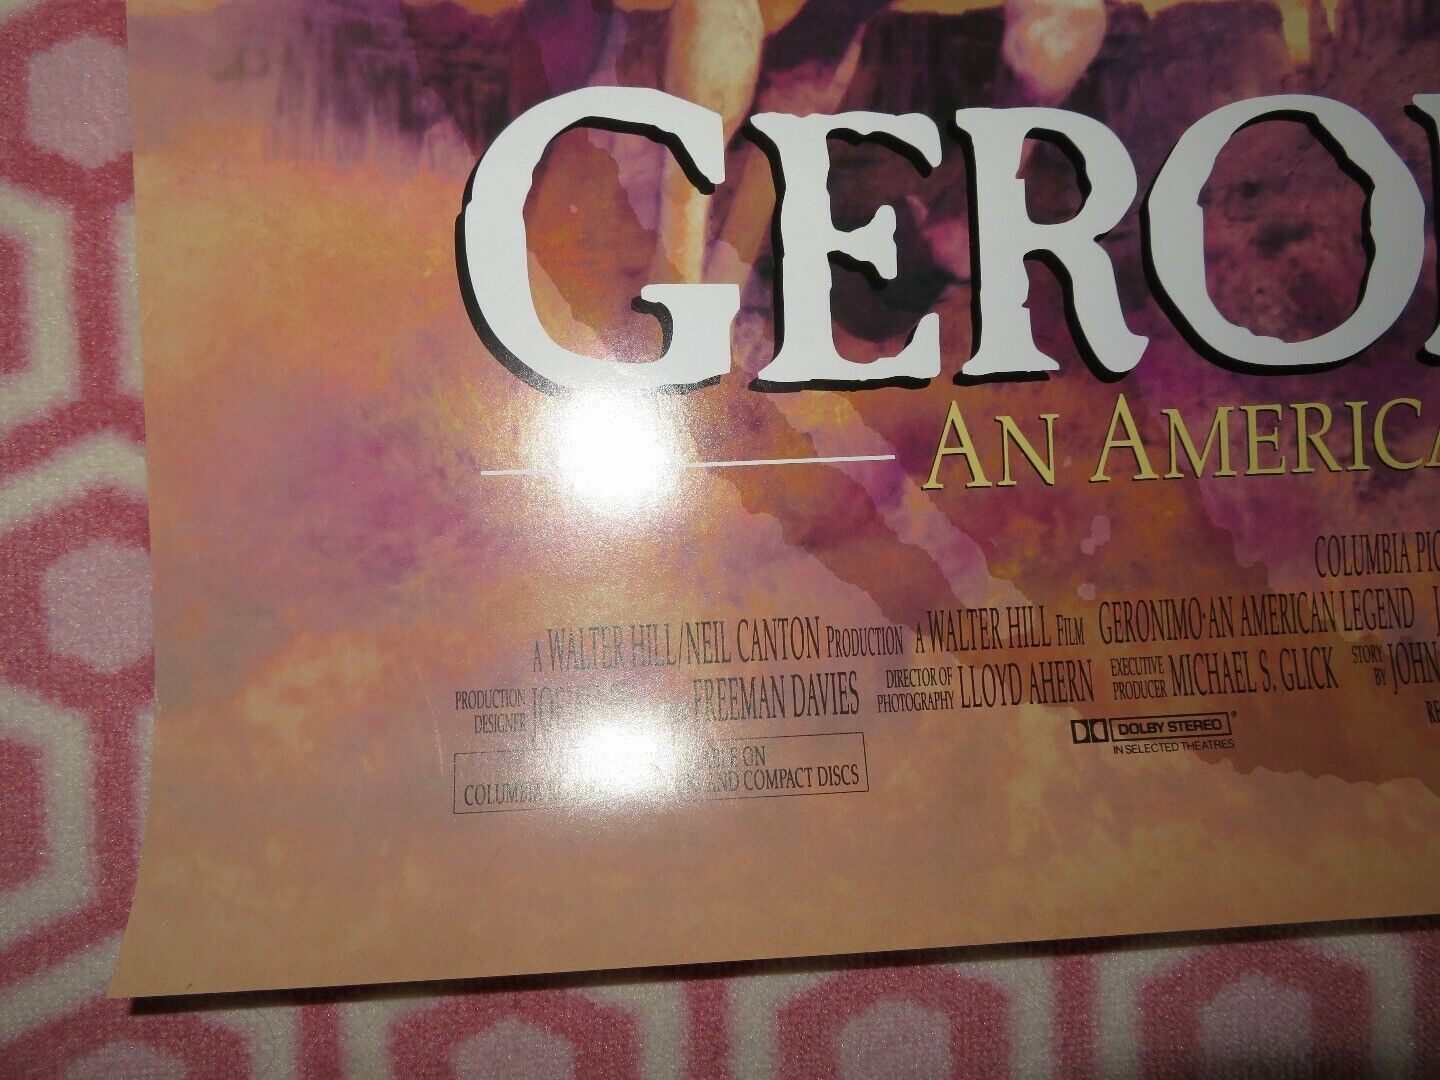 GERONIMO ONE SHEET ROLLED POSTER LASON PATRIC  1993